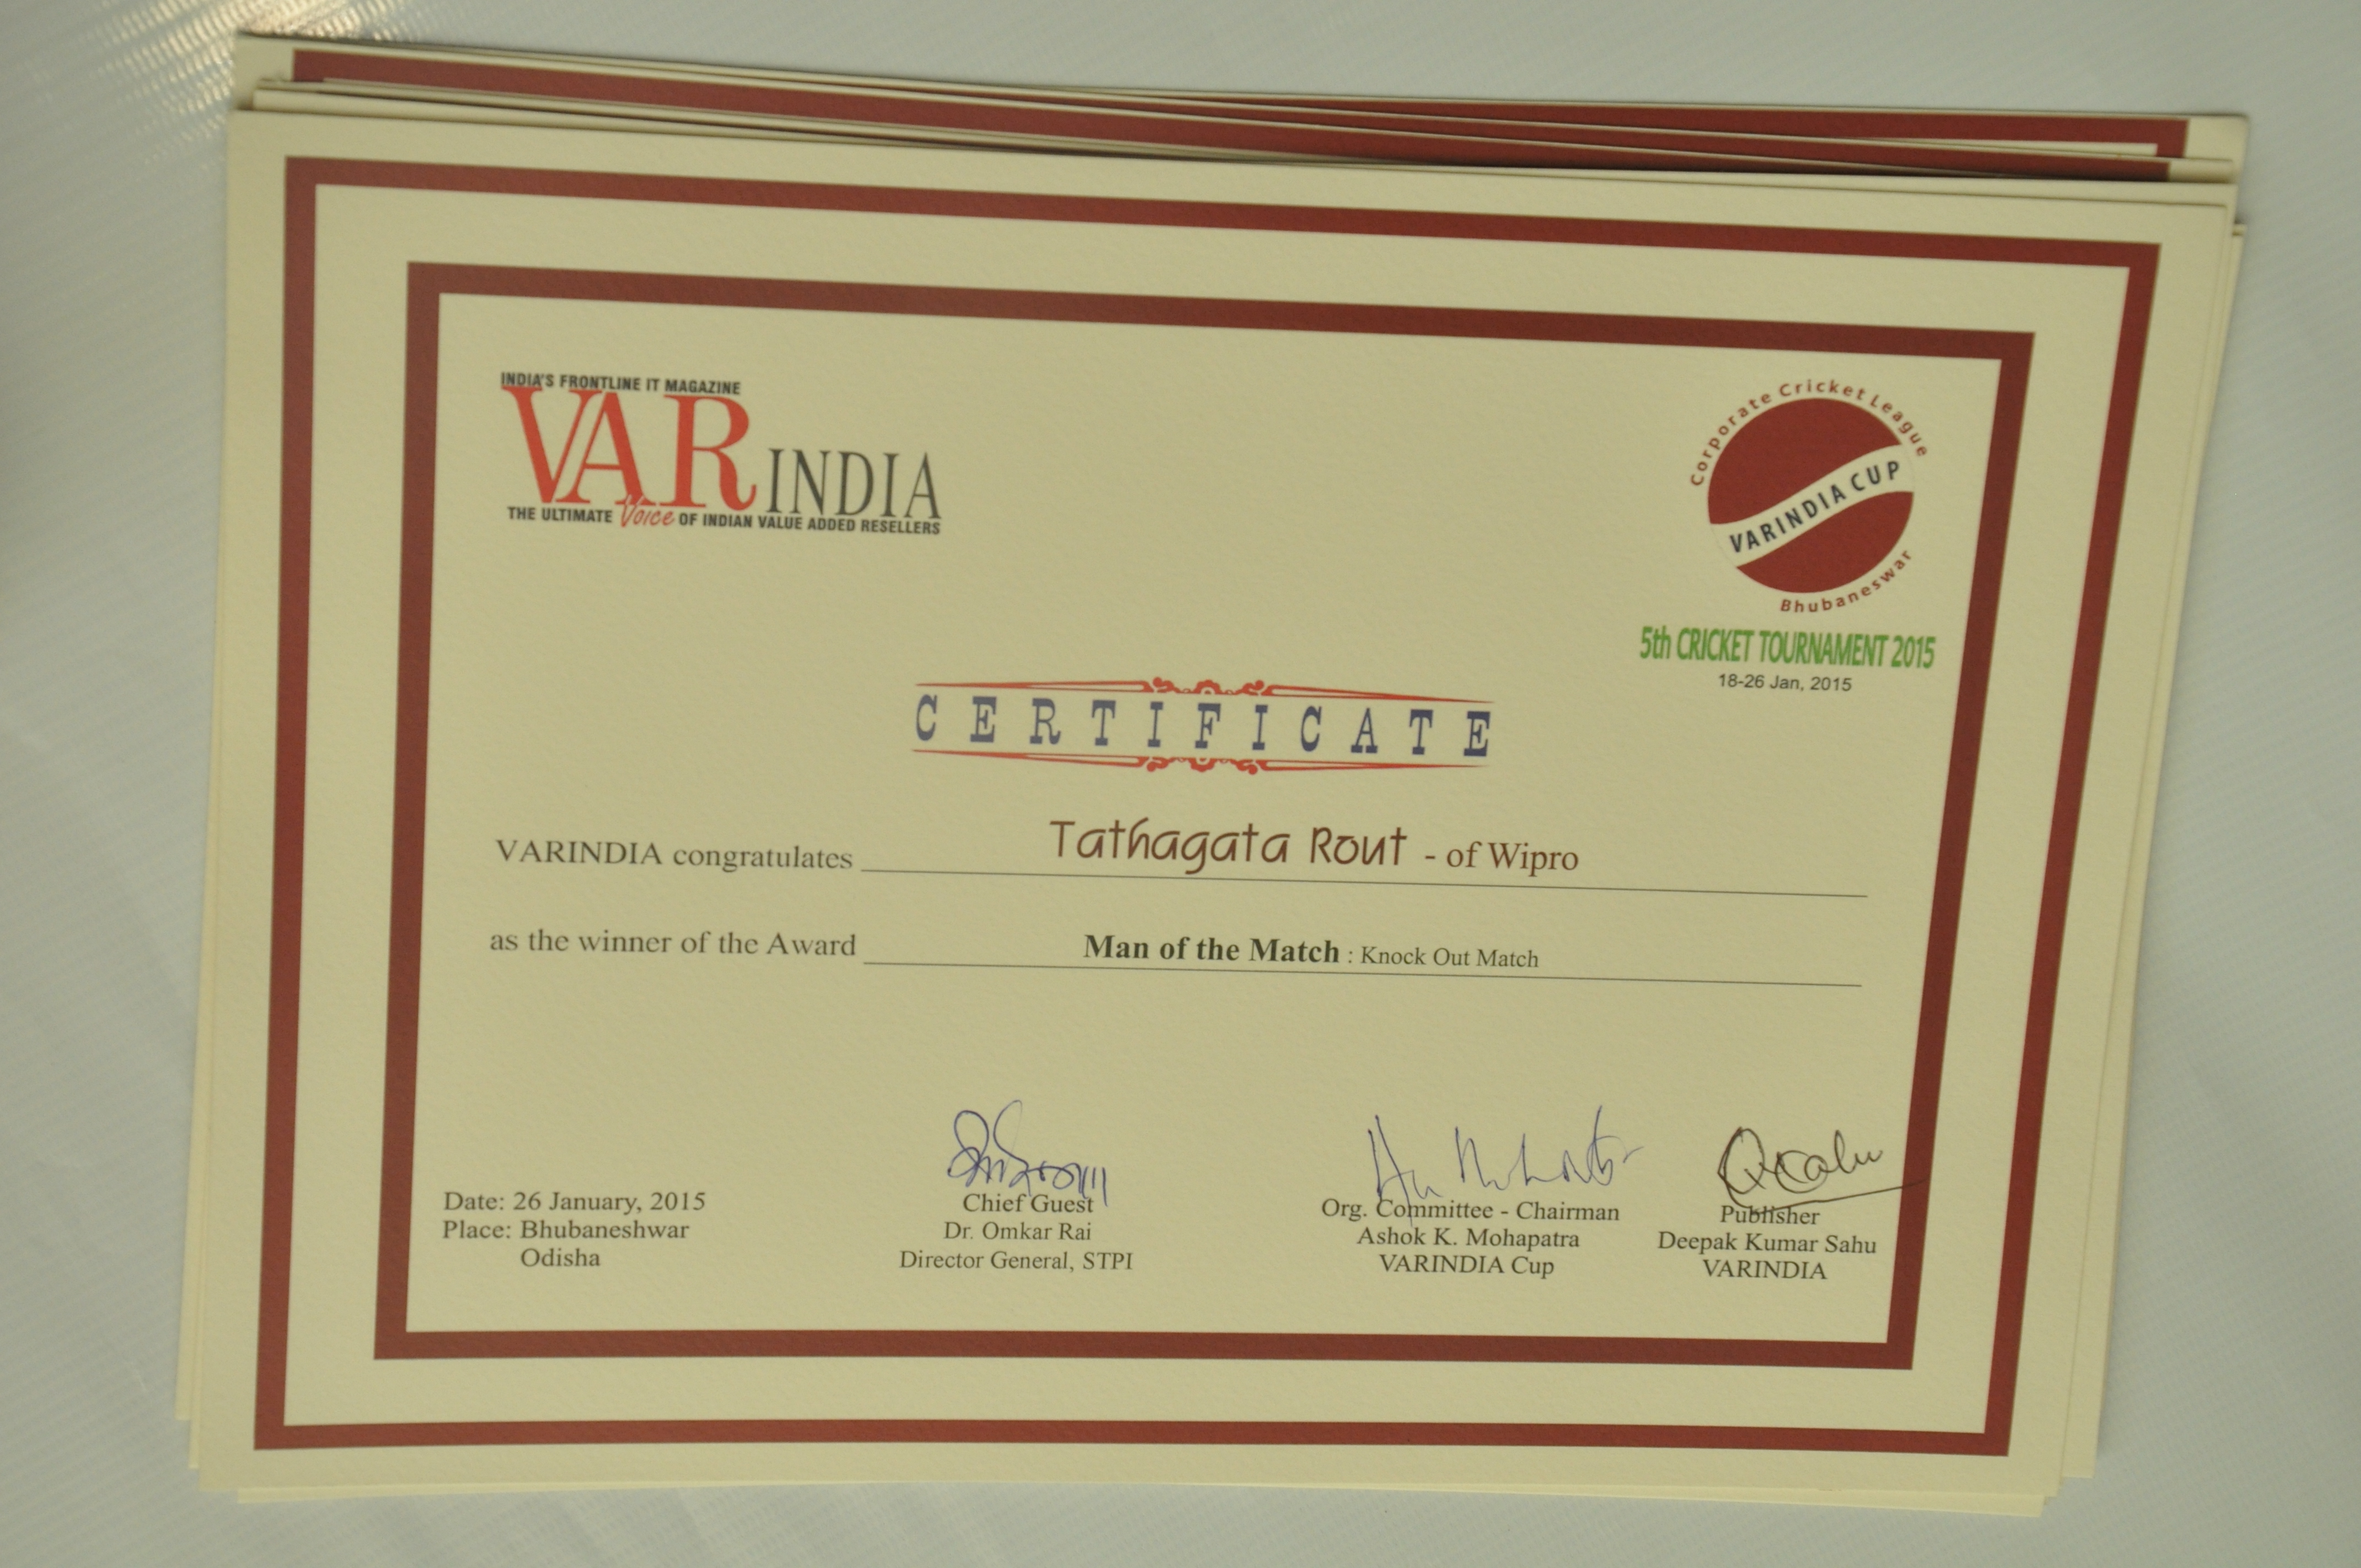 VARINDIA CUP Cricket Tournament for the 5th consecutive year